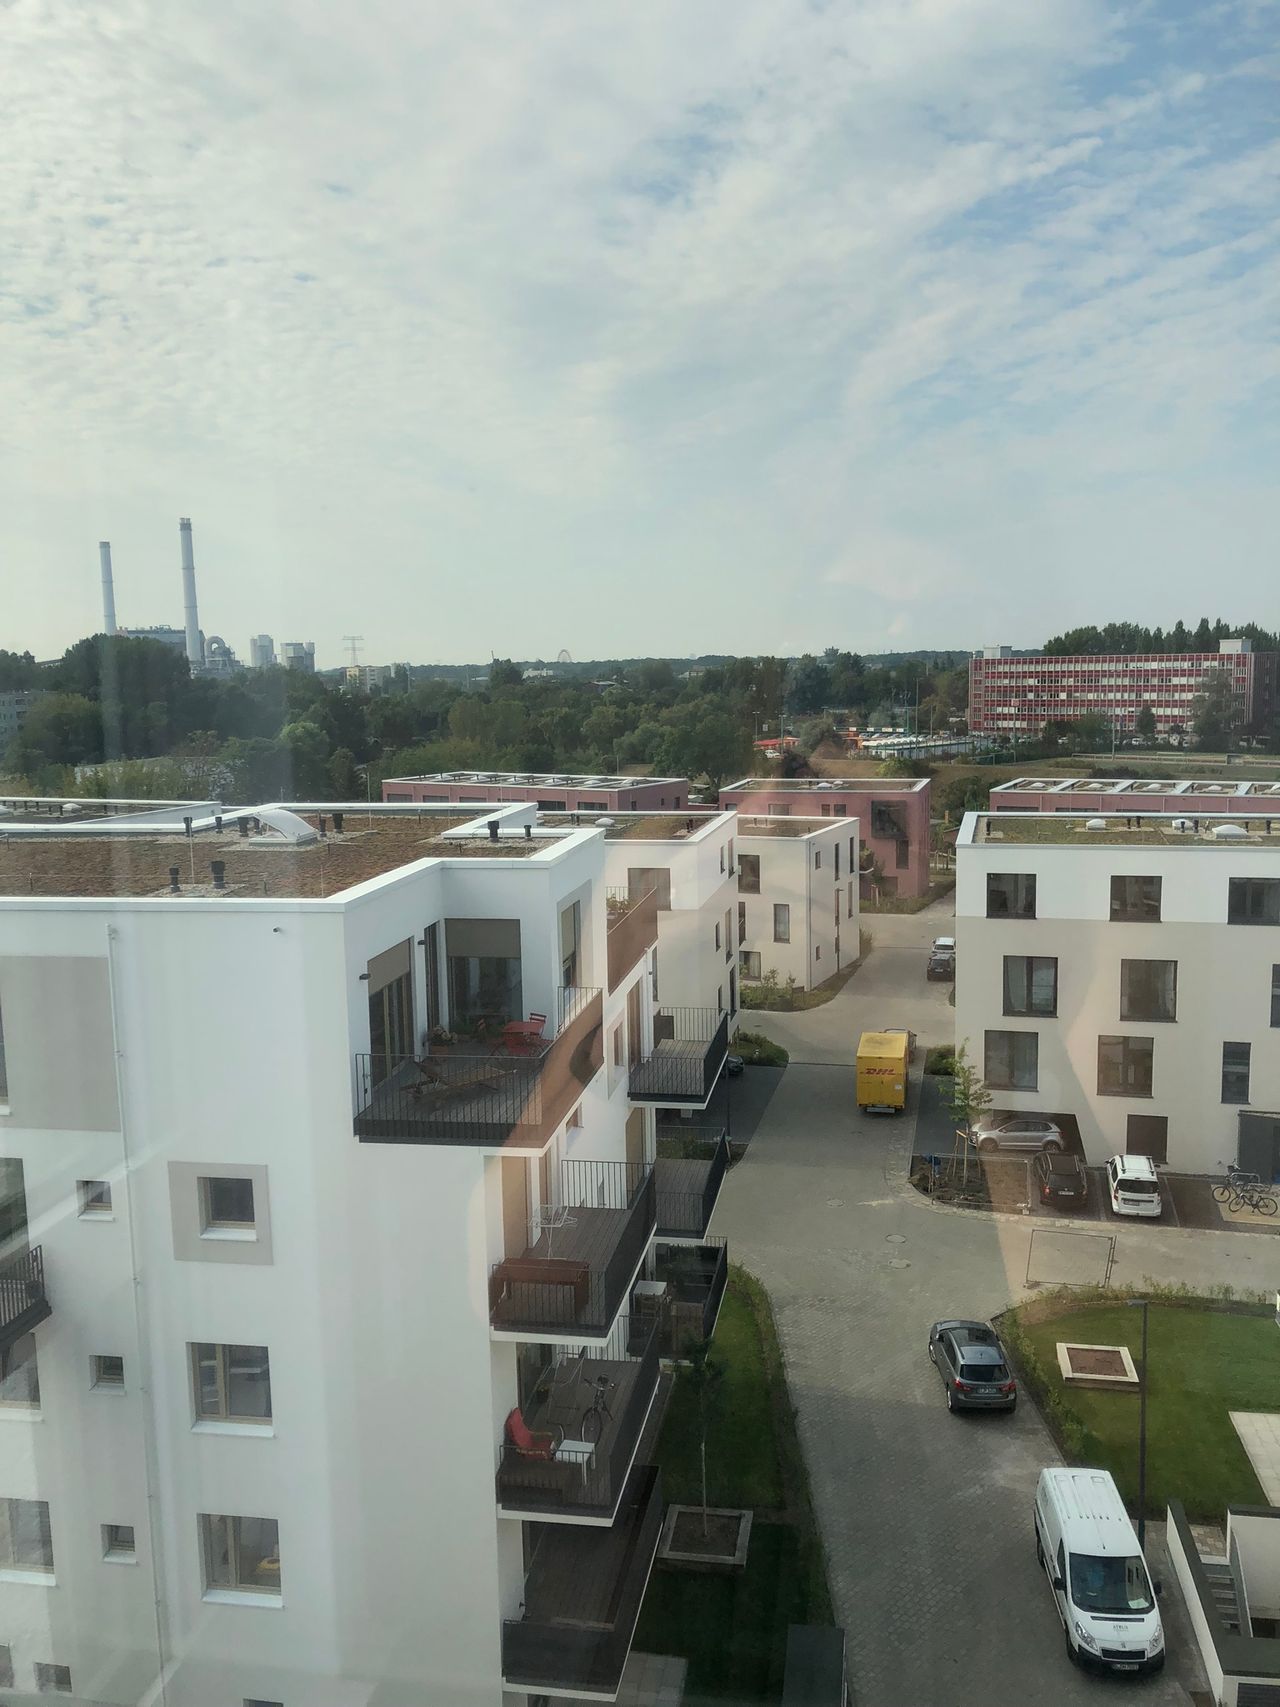 3-room new-build maisonette with 2 terraces (incl. roof terrace) in Lichtenberg